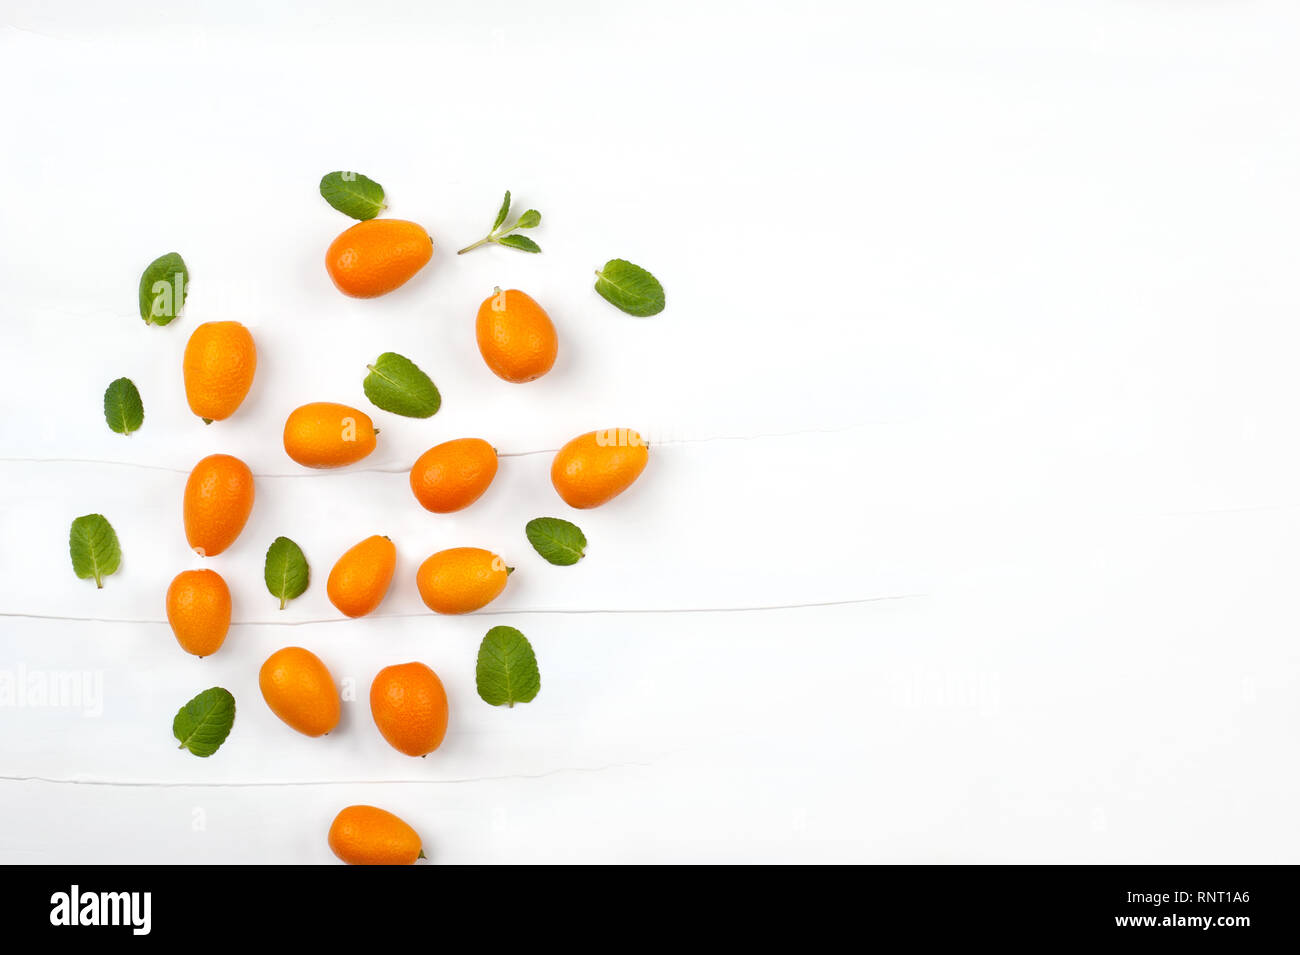 Creative background made with kumquat  fruits and mint  leafs.Kumquats whole, still life pattern background. Image with copy space. Stock Photo